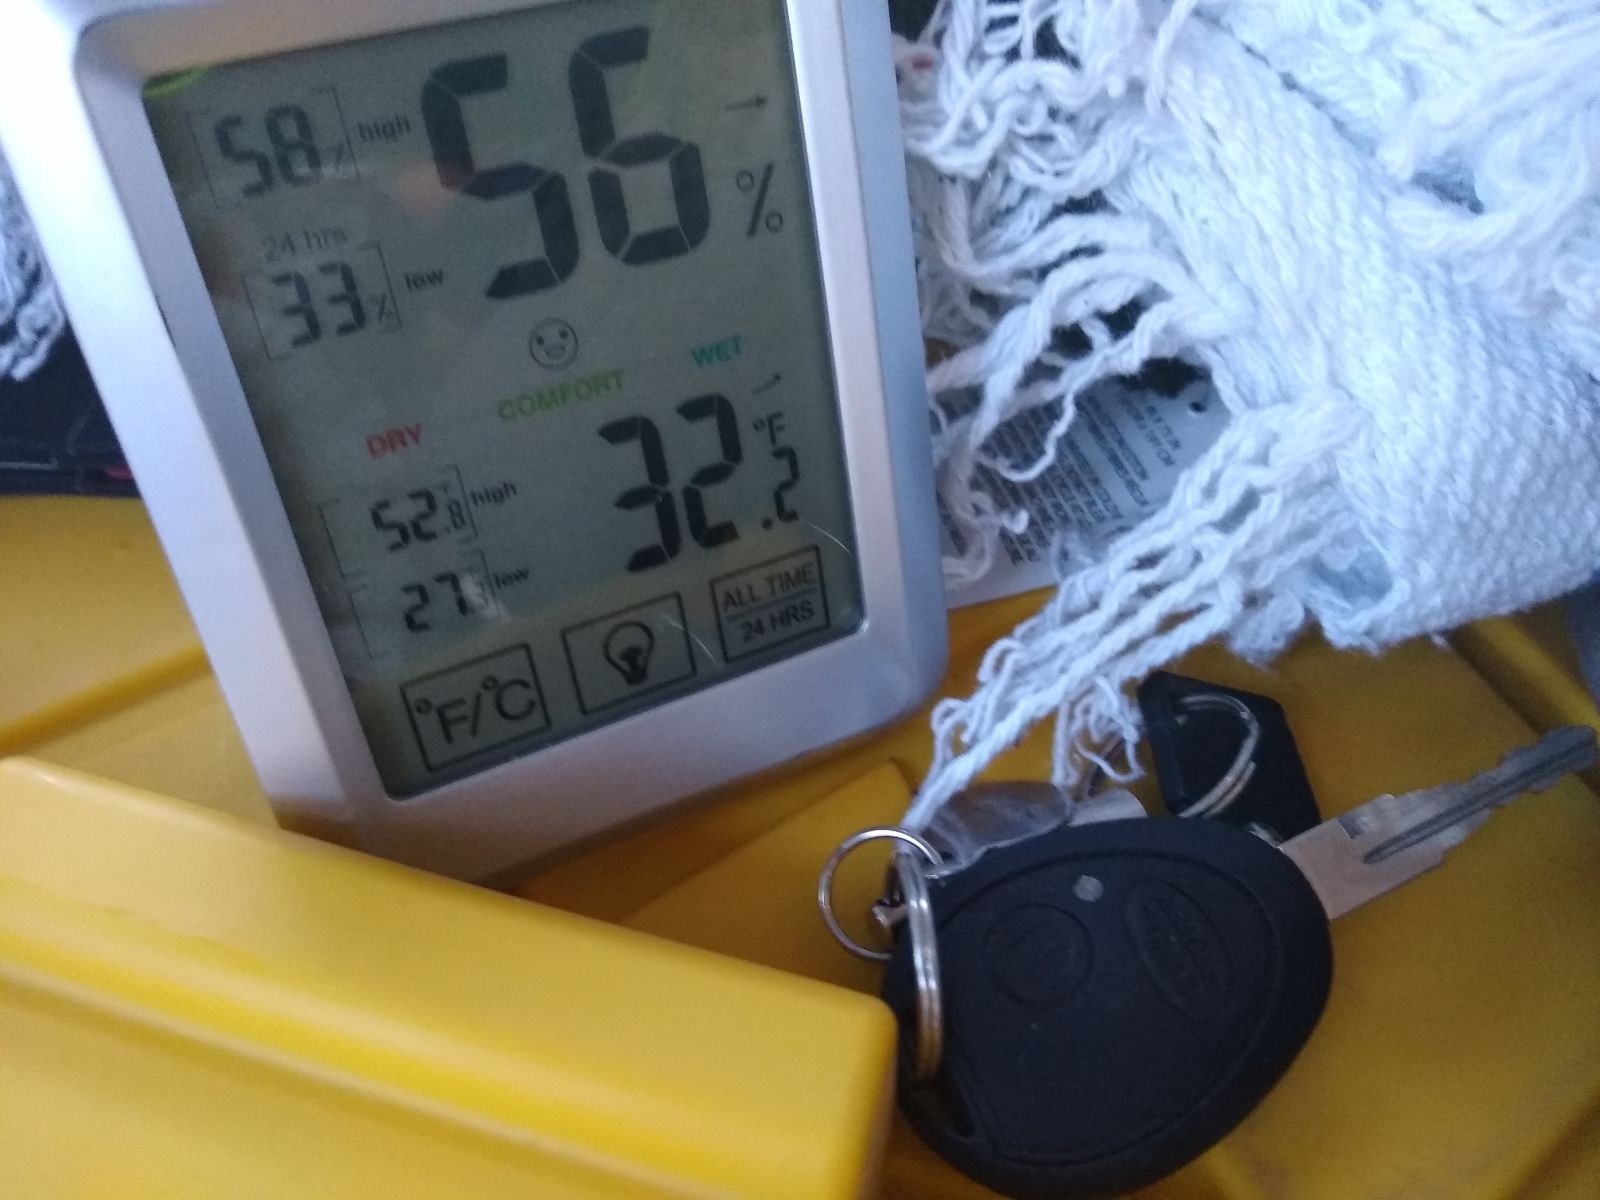 Looks like the coldest it got in the car was 27F, which given it was around 18 out I think I can live with. Heater got it up to 52F which I am pretty happy with.